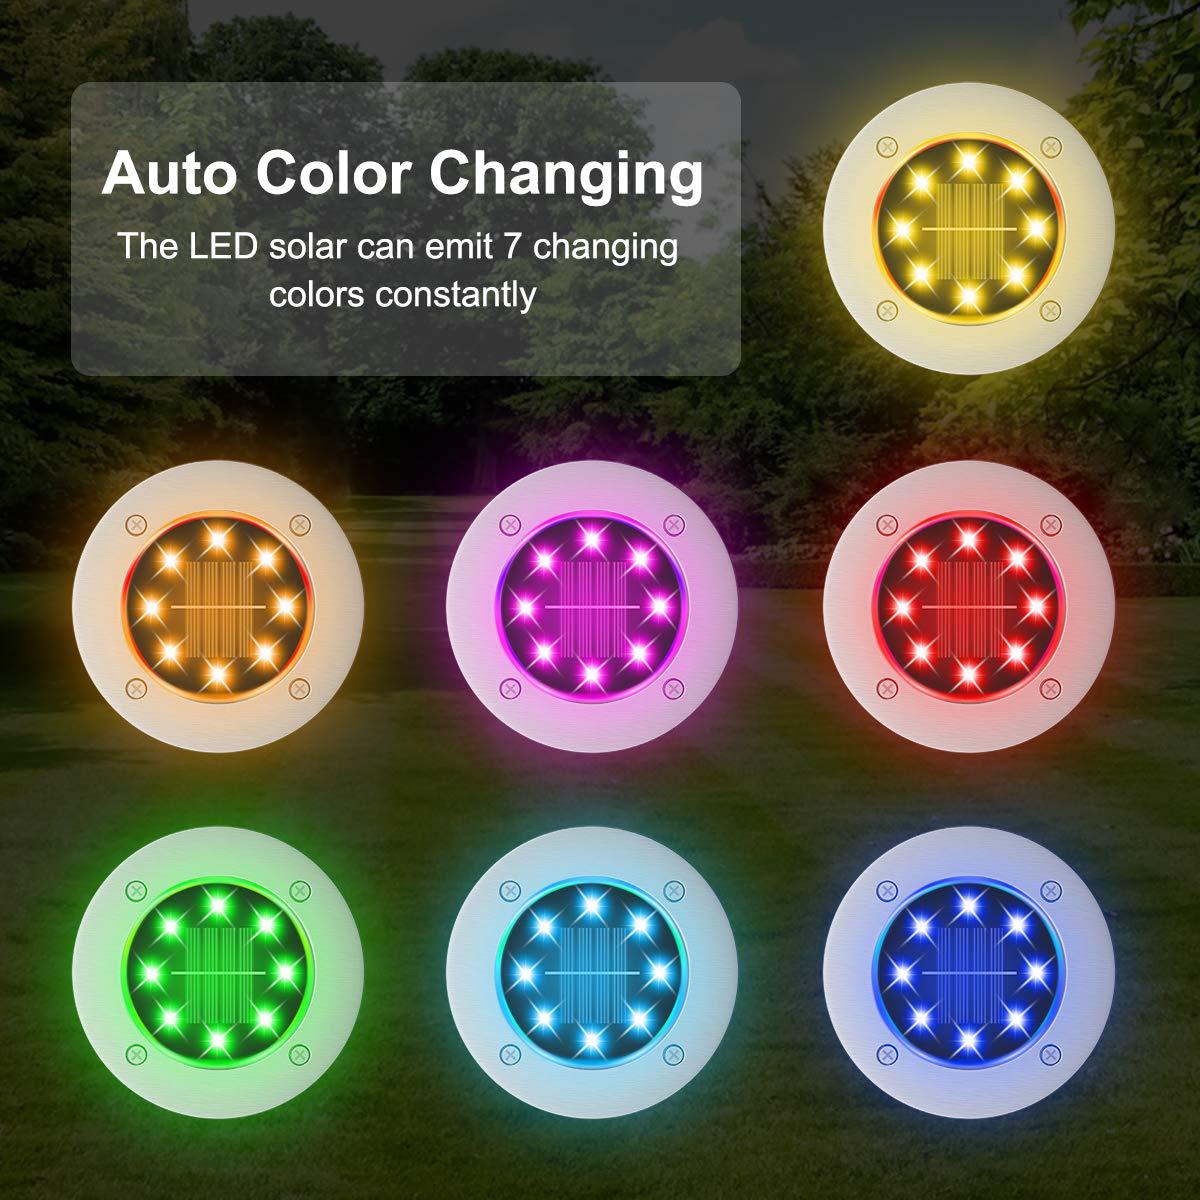 Colorful-Conversion-LED-Lawn-Lights-RGB-Solar-Stainless-Steel-8LED-Underground-Light-Garden-Lawn-Dec-1816608-7